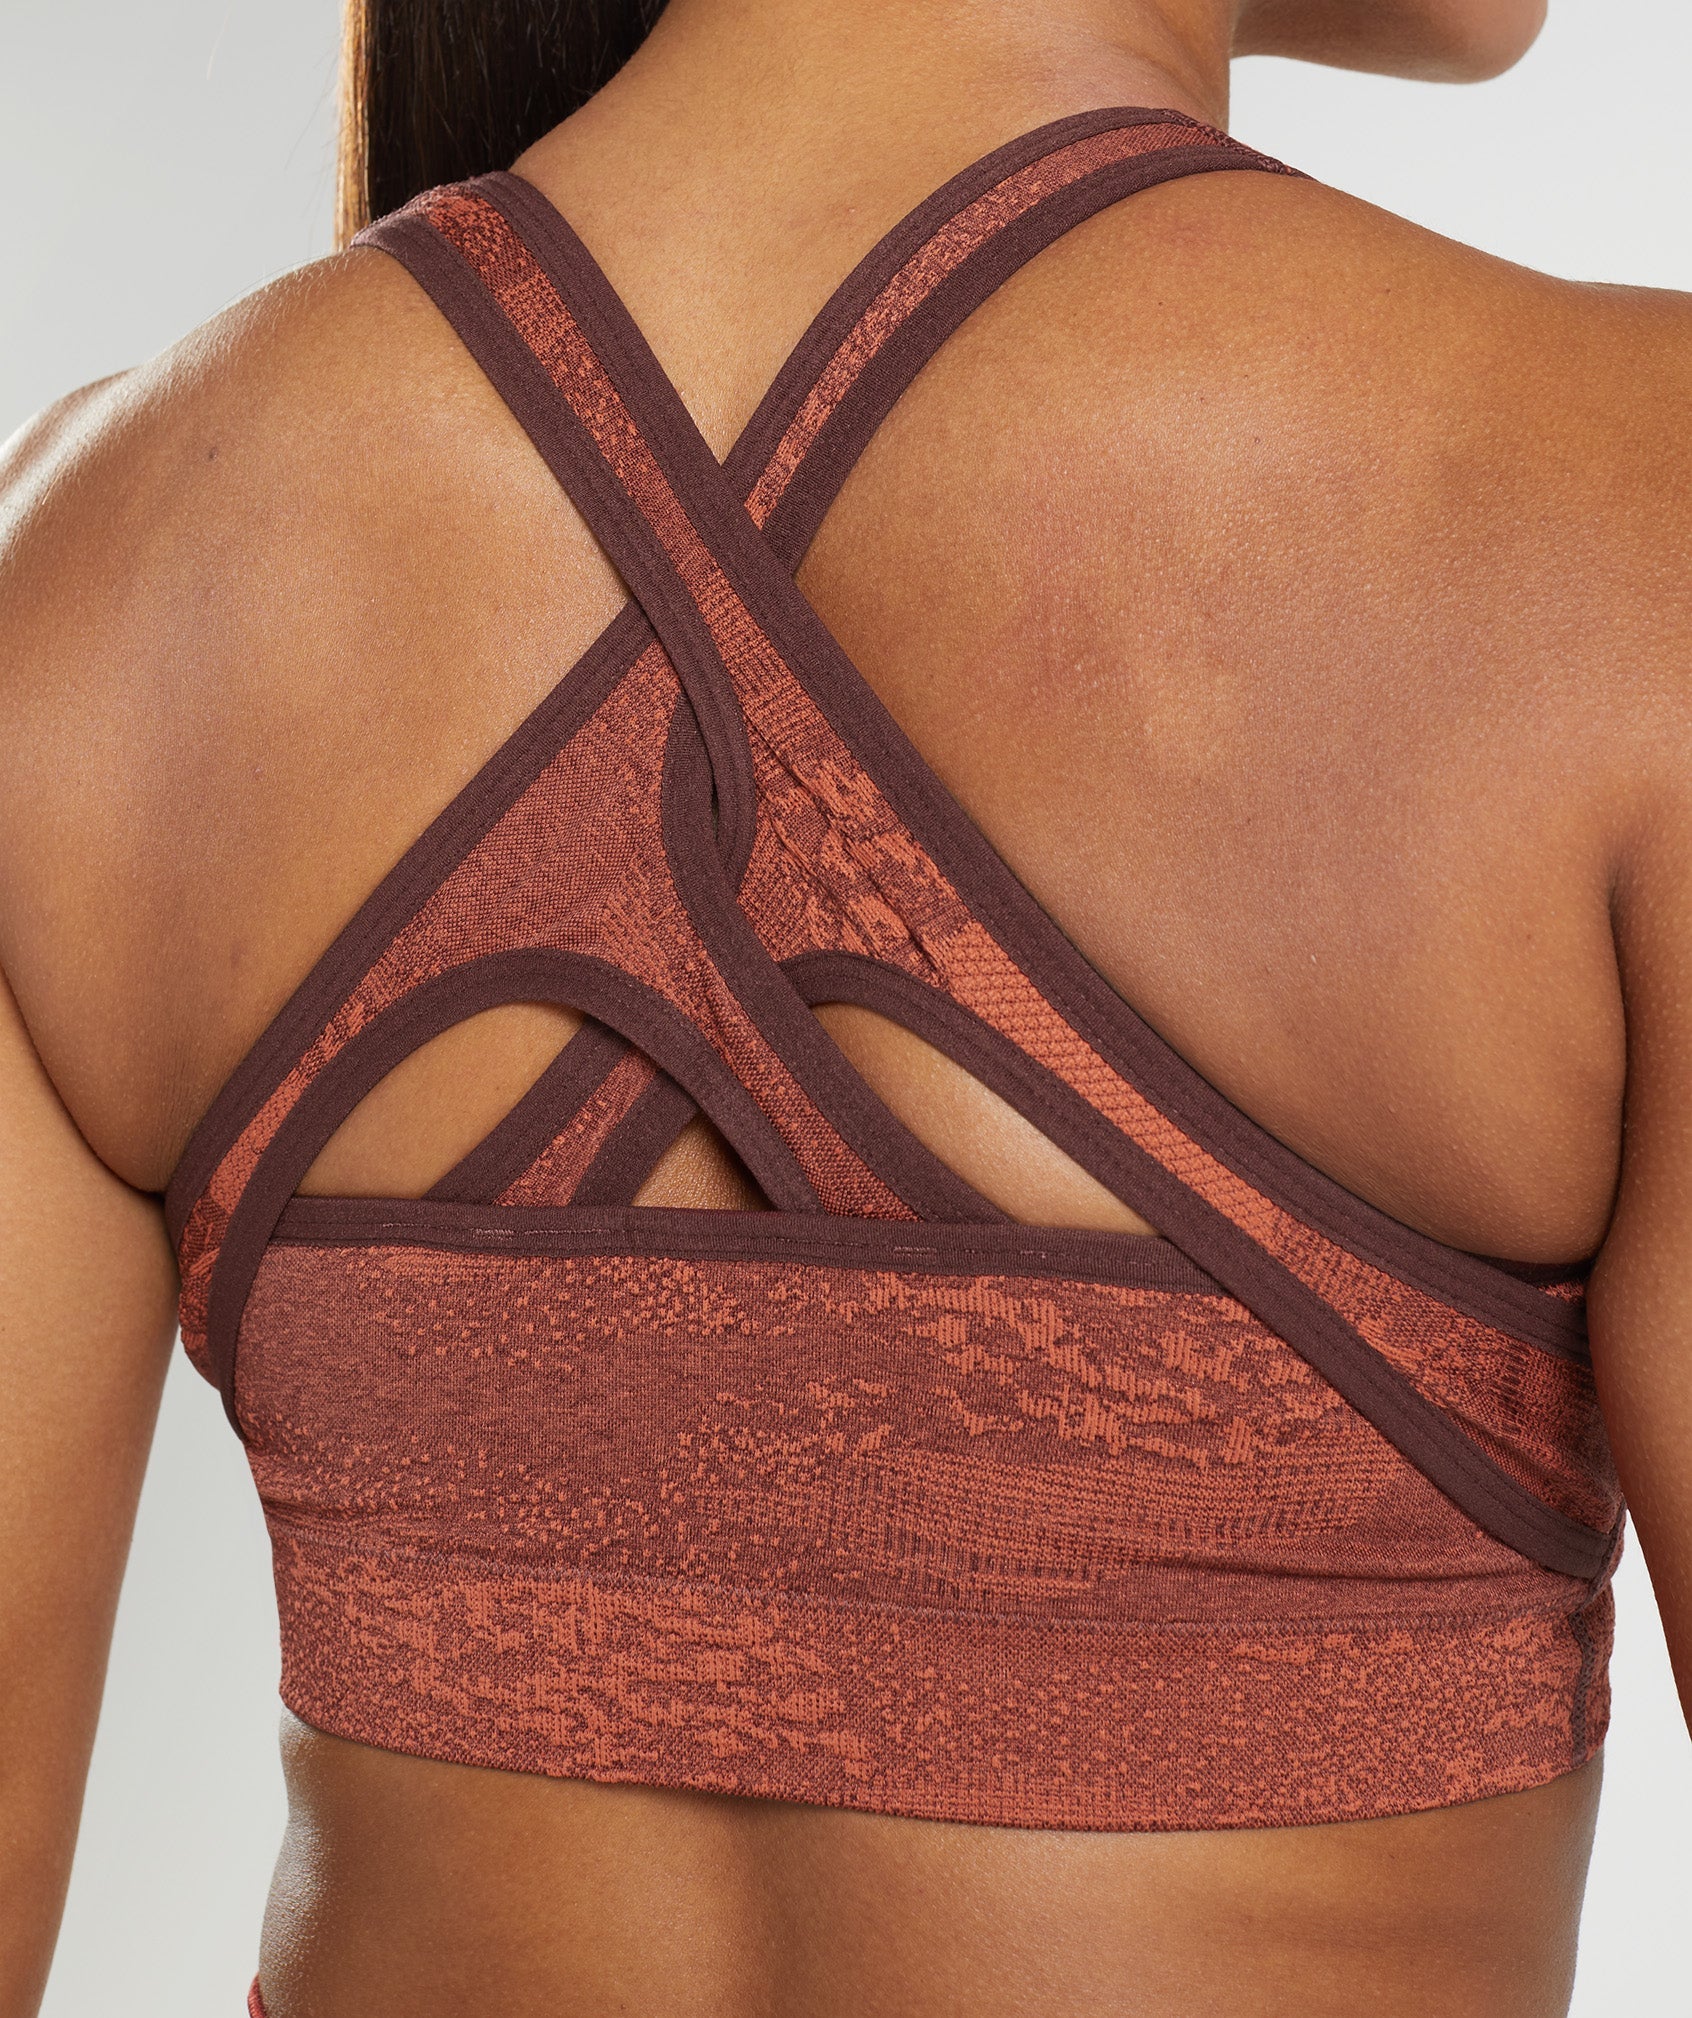 Adapt Camo Seamless Sports Bra in Storm Red/Cherry Brown